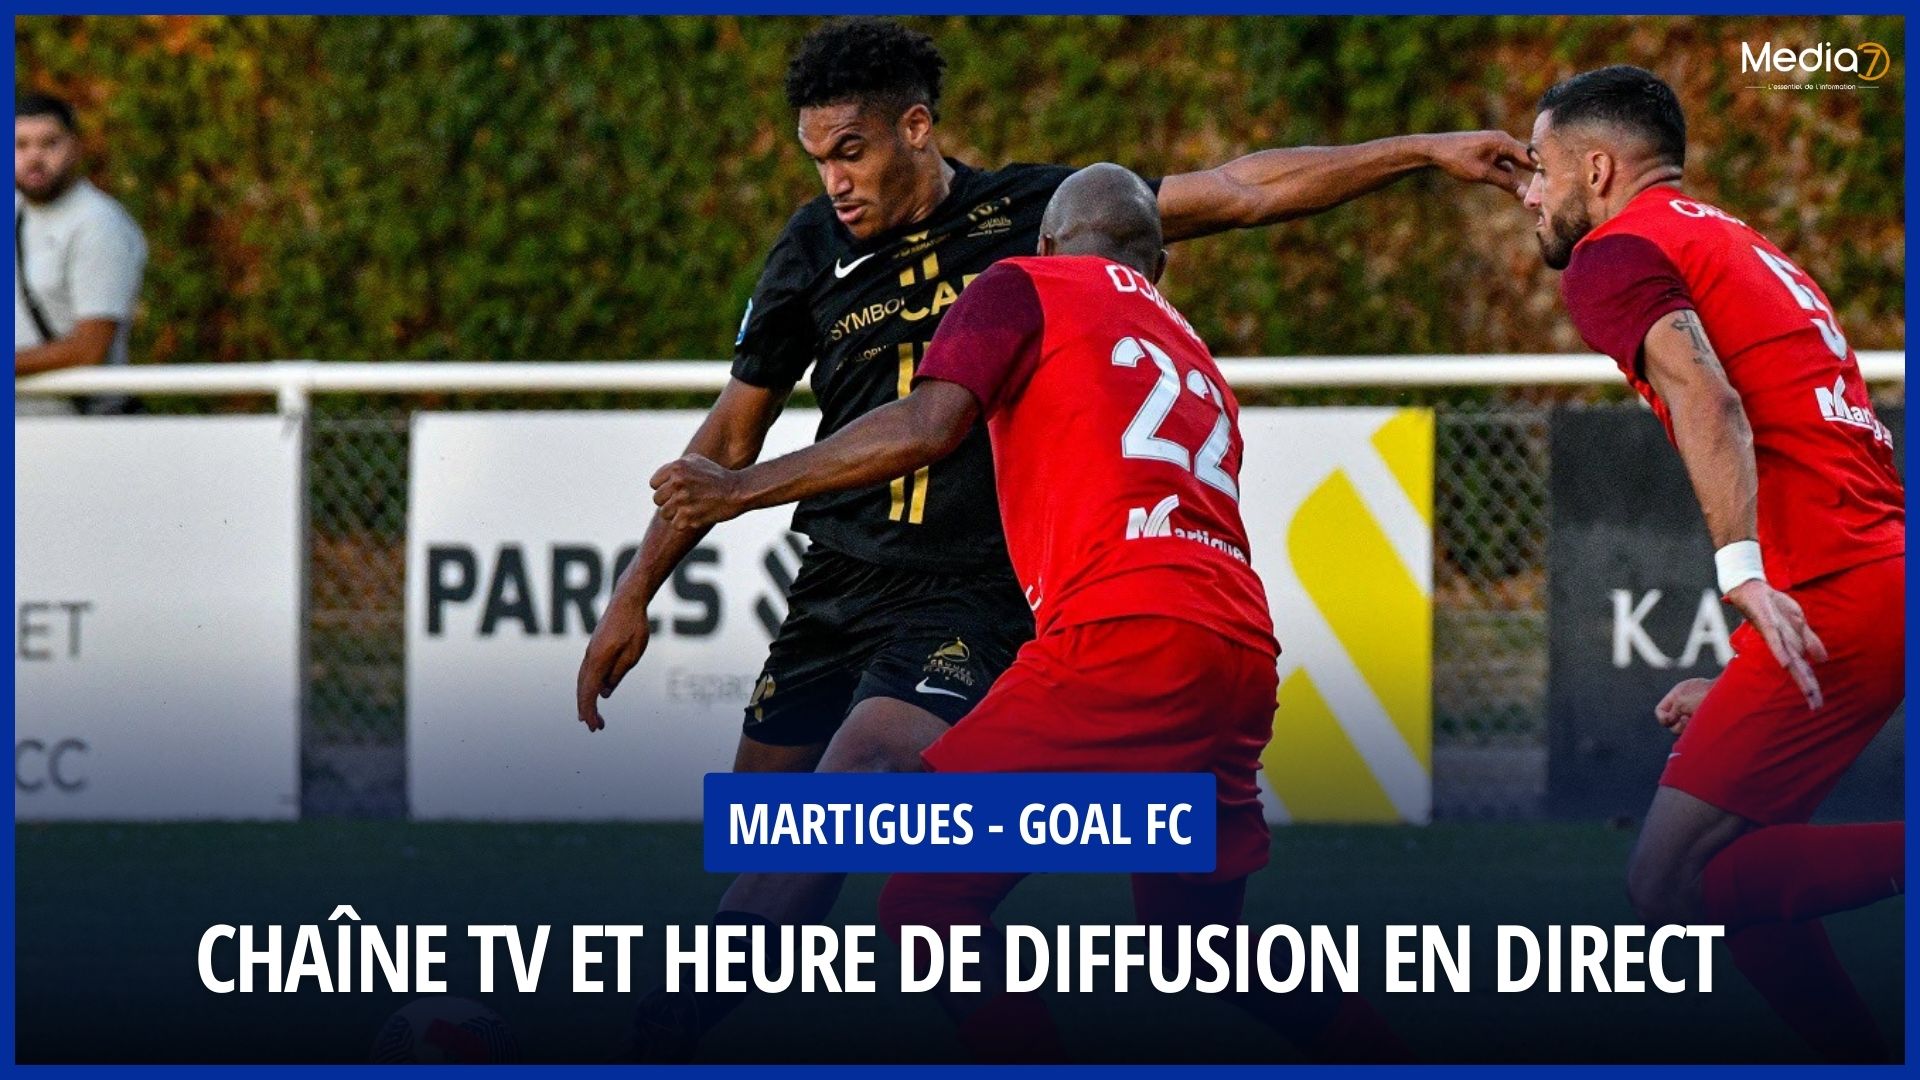 Live broadcast of the Martigues - GOAL FC Match: TV Channel and Schedule - Media7